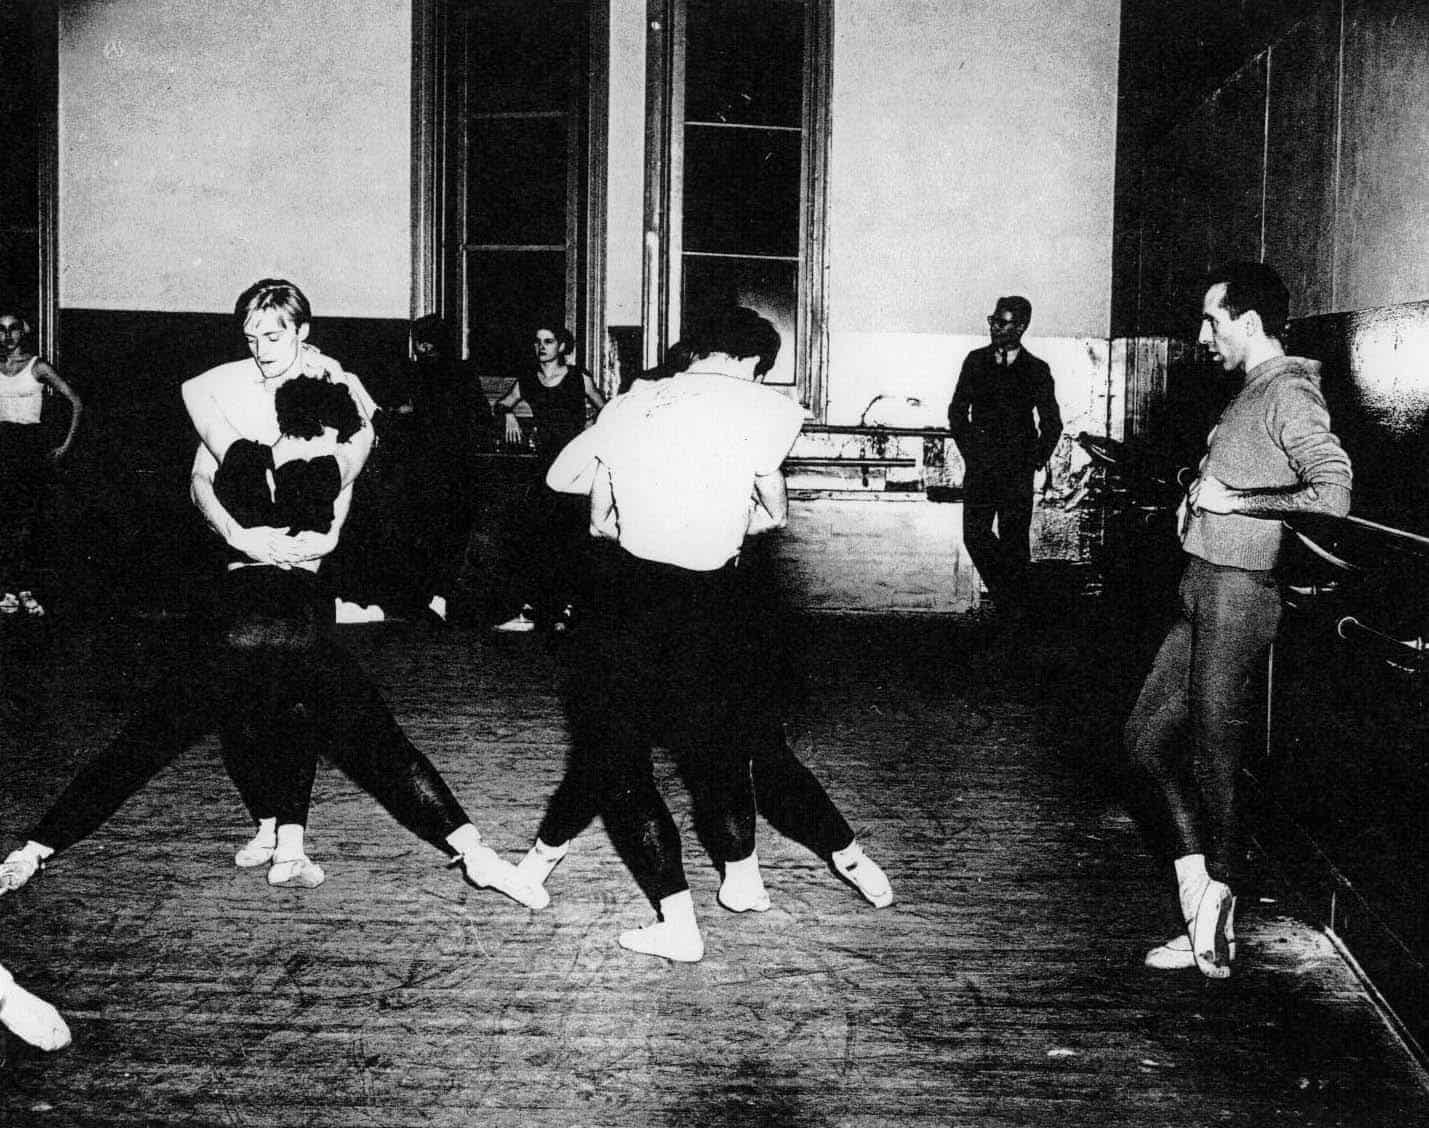 Age of Anxiety: Robert Barnett (on left) and Jerome Robbins rehearsing dancers, 1950. (Walter E. Owen)